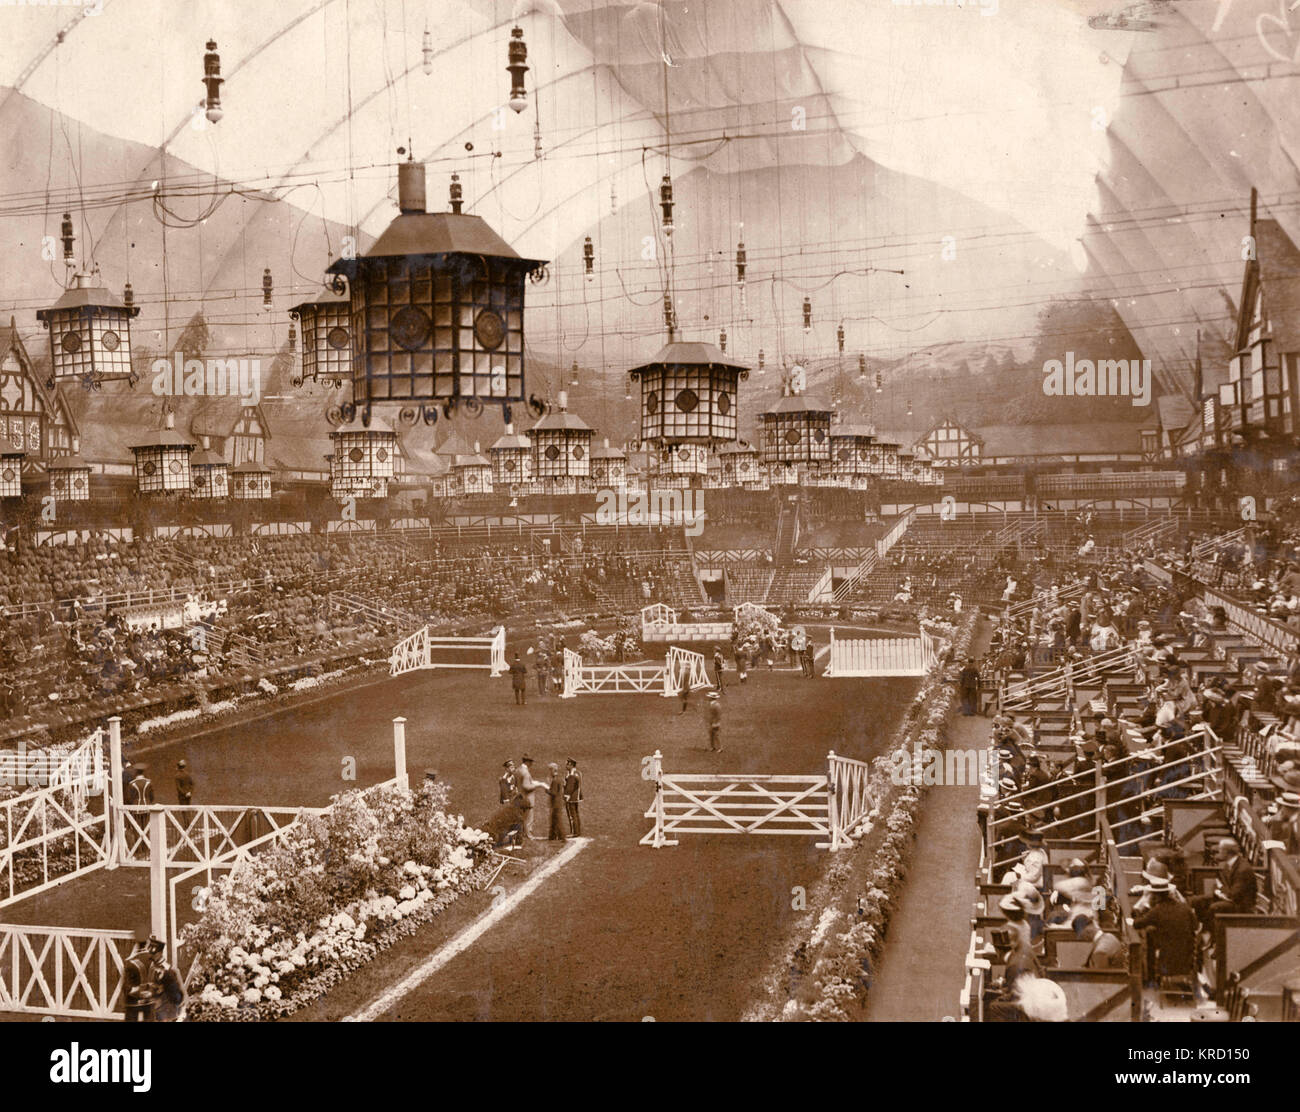 View of the arena inside the Grand Hall at the International Horse Show, Olympia exhibition centre, West Kensington, London.  The arena is set out with fences for the horse jumping events, the auditorium is partly filled with audience members, and large Chinese style lanterns hang from the roof.       Date: circa 1909 Stock Photo